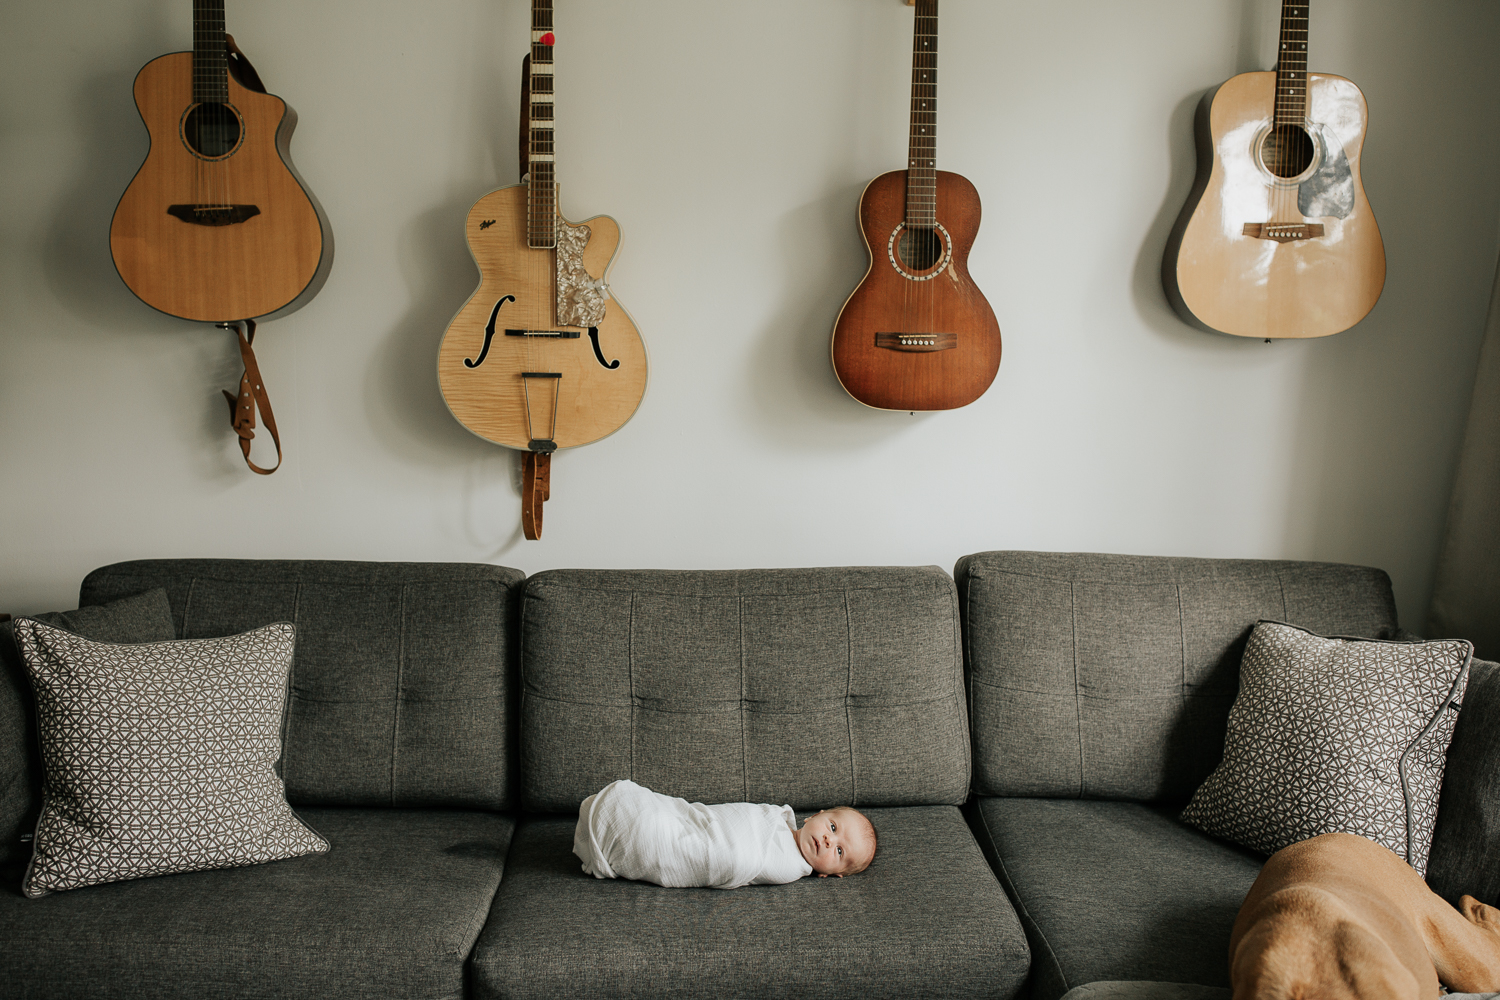 2 week old baby boy in white swaddle lying awake on dark grey couch, guitars hanging on wall above him - Newmarket Lifestyle Photography